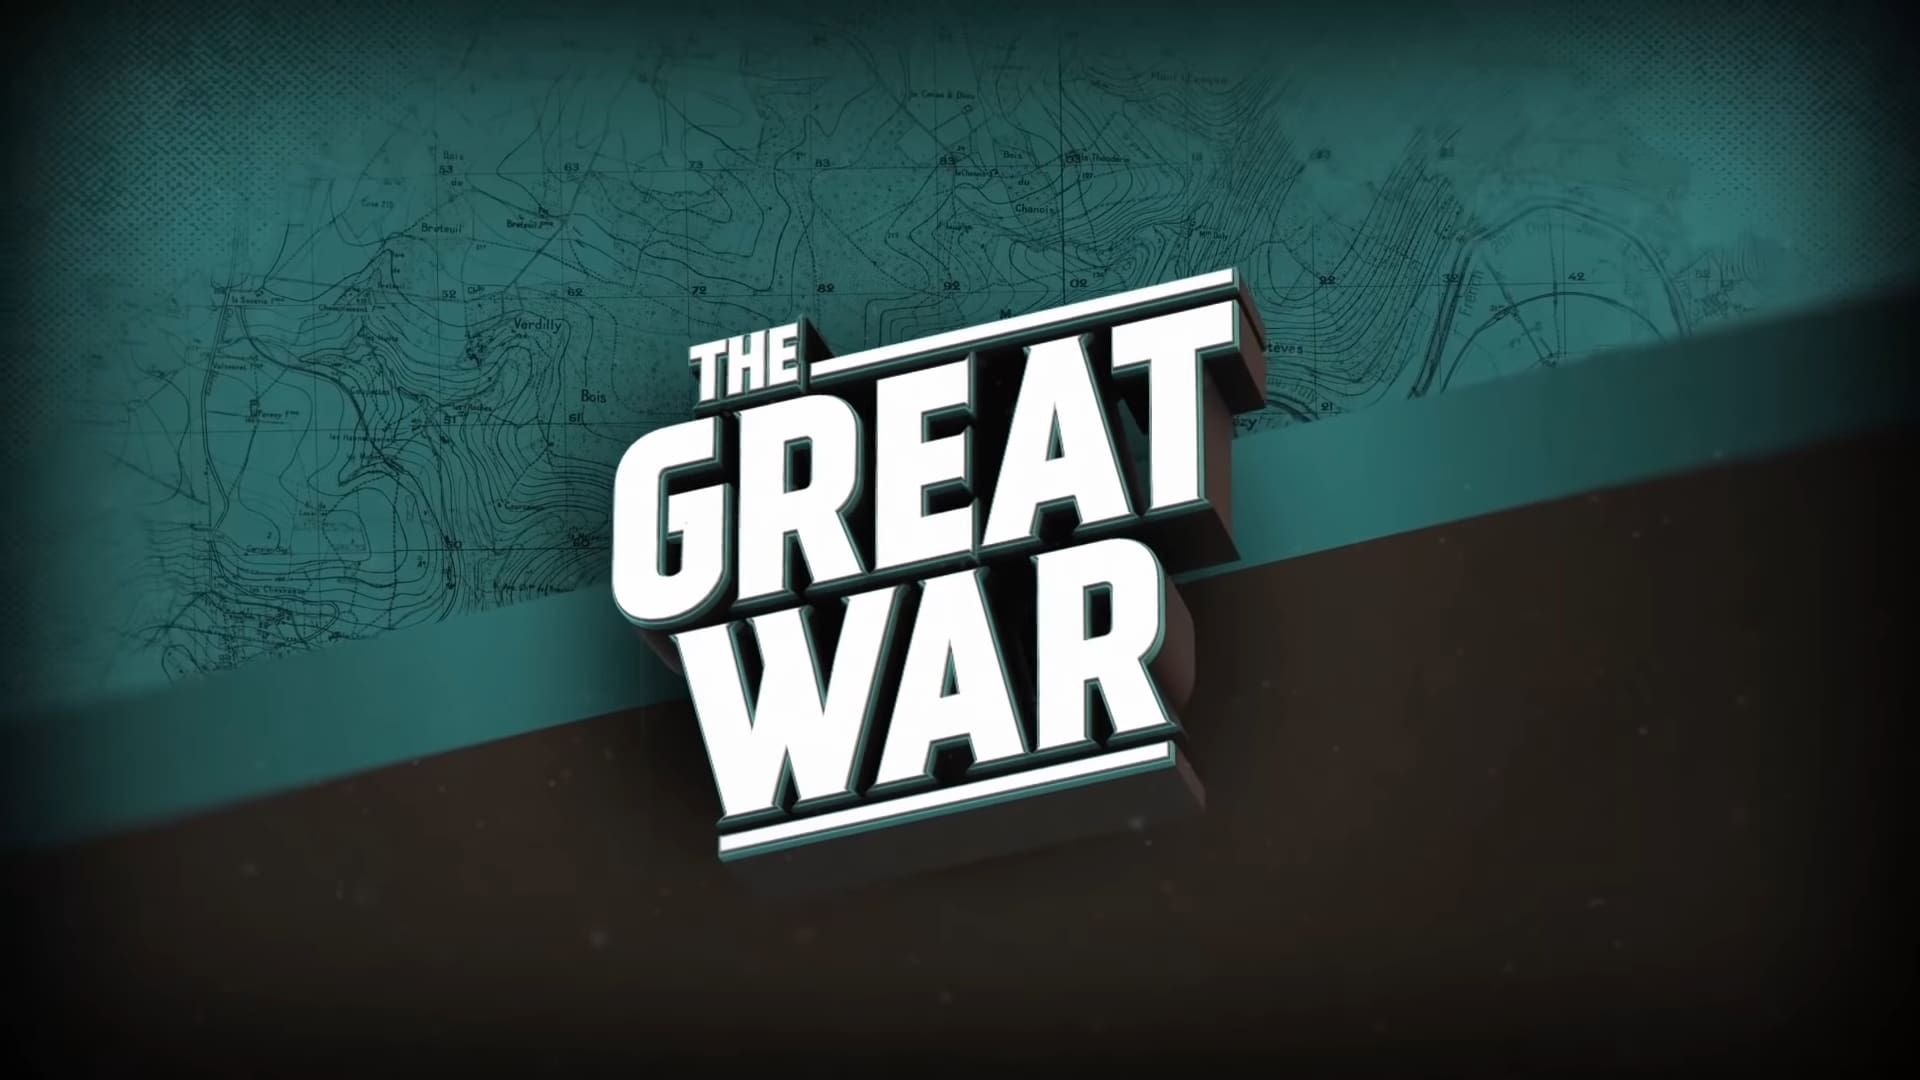 The Great War background